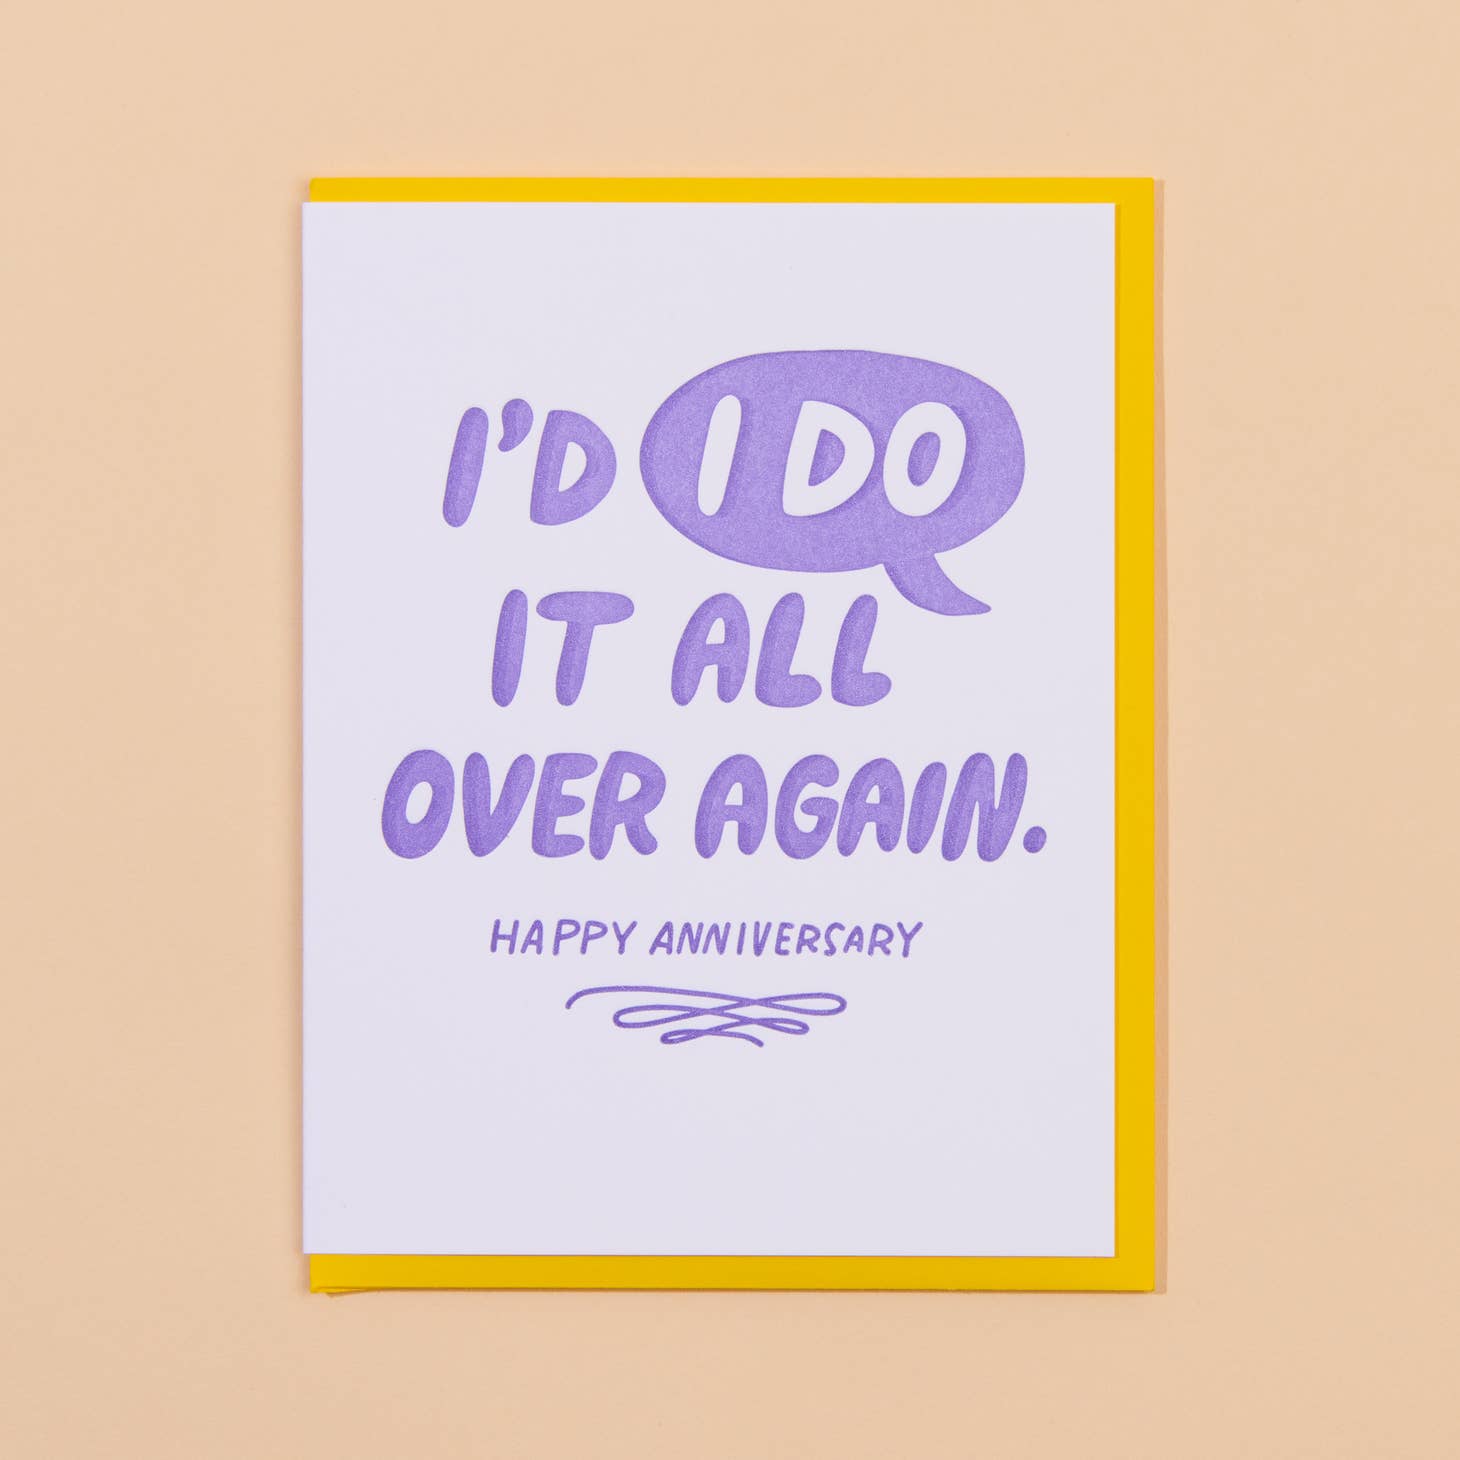 White card with lavender text that says “I’d I do it all over again” and “Happy anniversary” with a lavender swirly doodle underneath the text.  The “I Do” is in a quotation bubble. Yellow envelope is included      